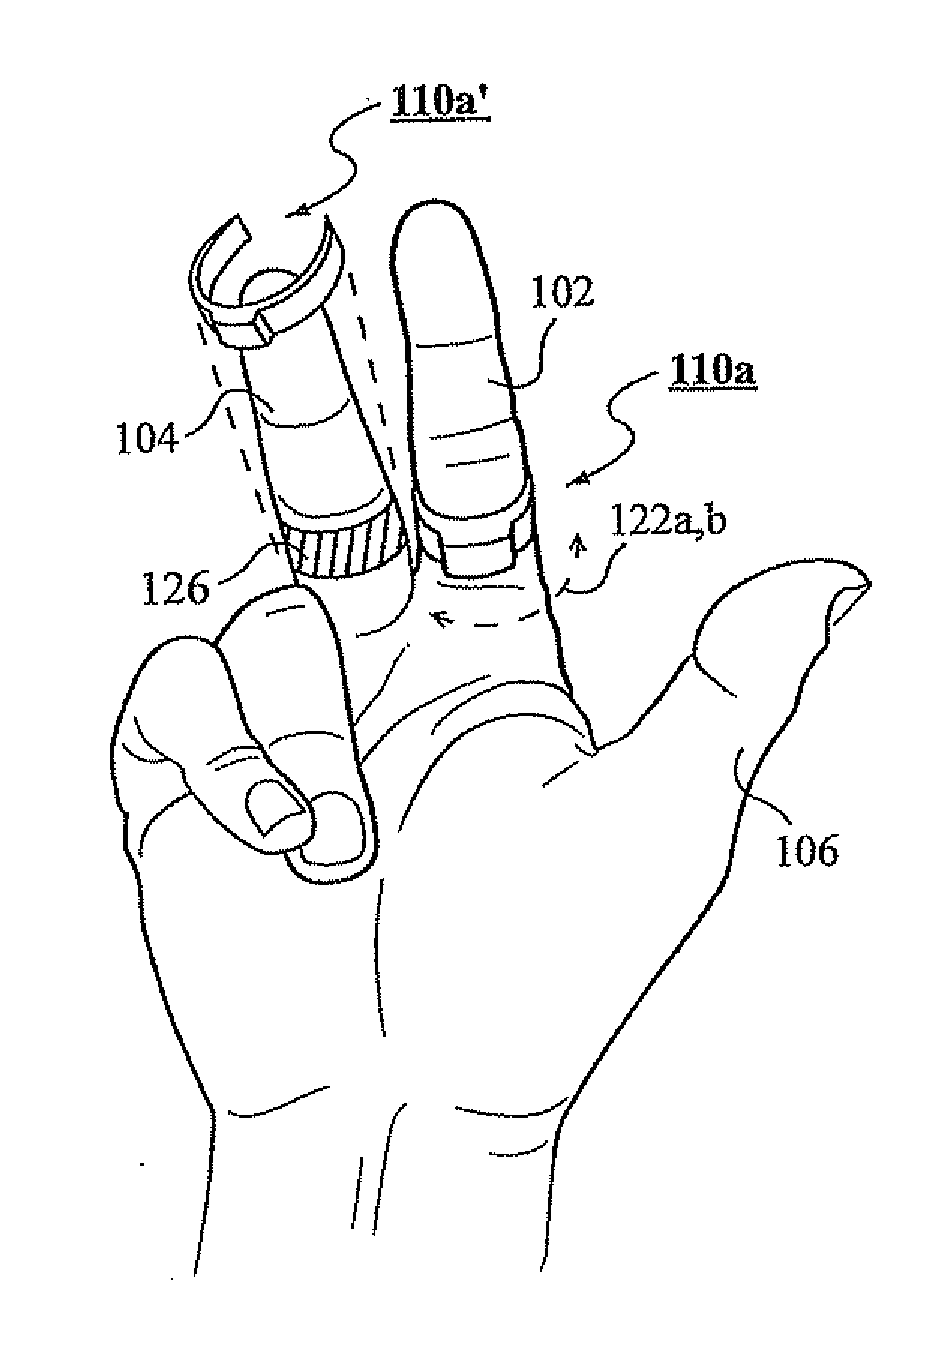 Finger-worn devices and related methods of use